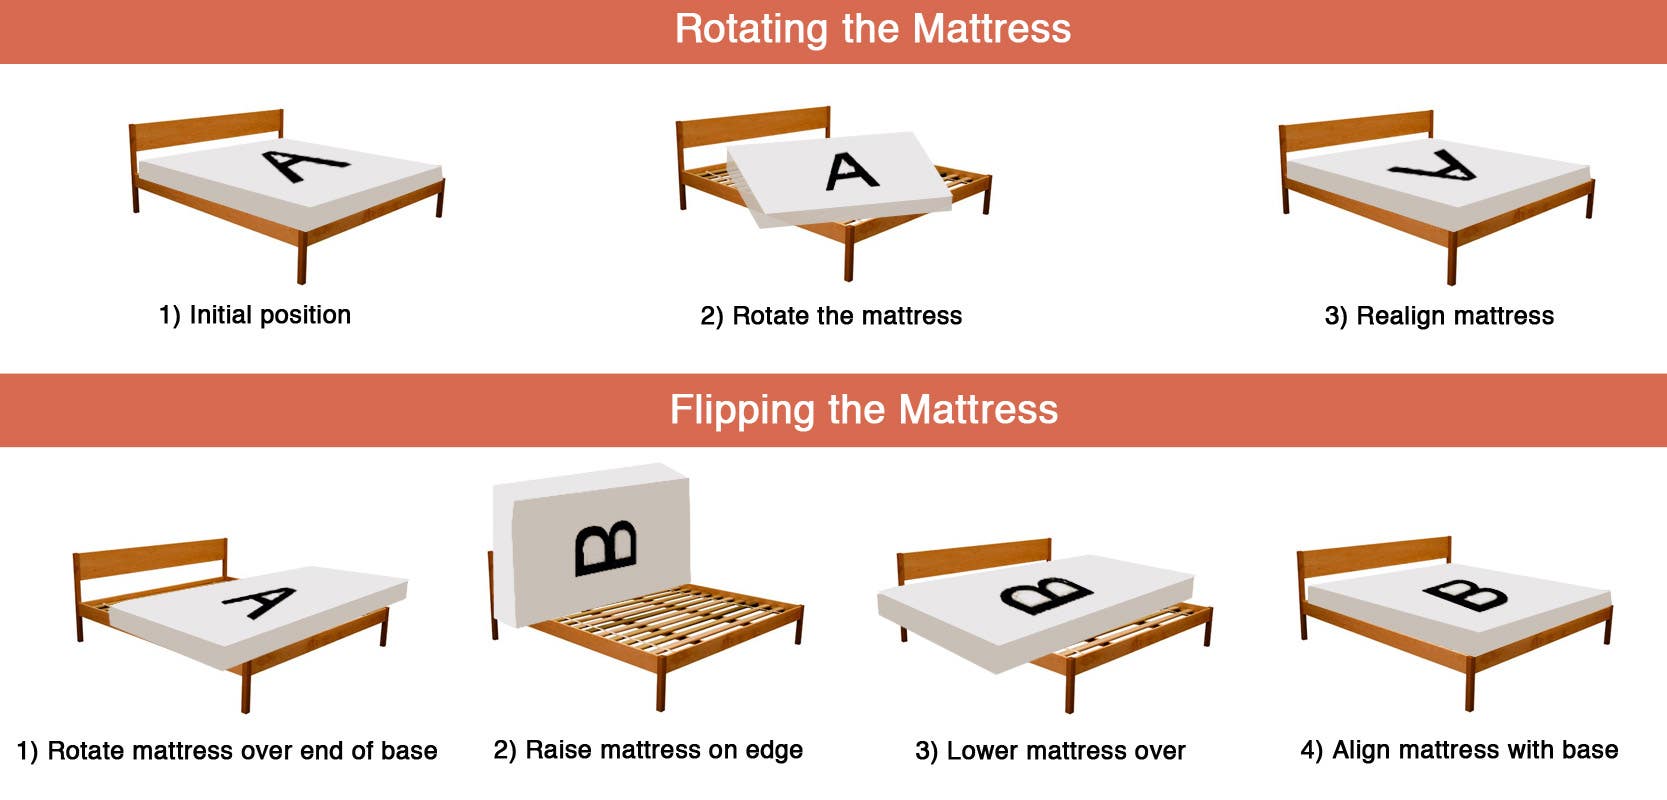 Why Rotate Your Mattress?